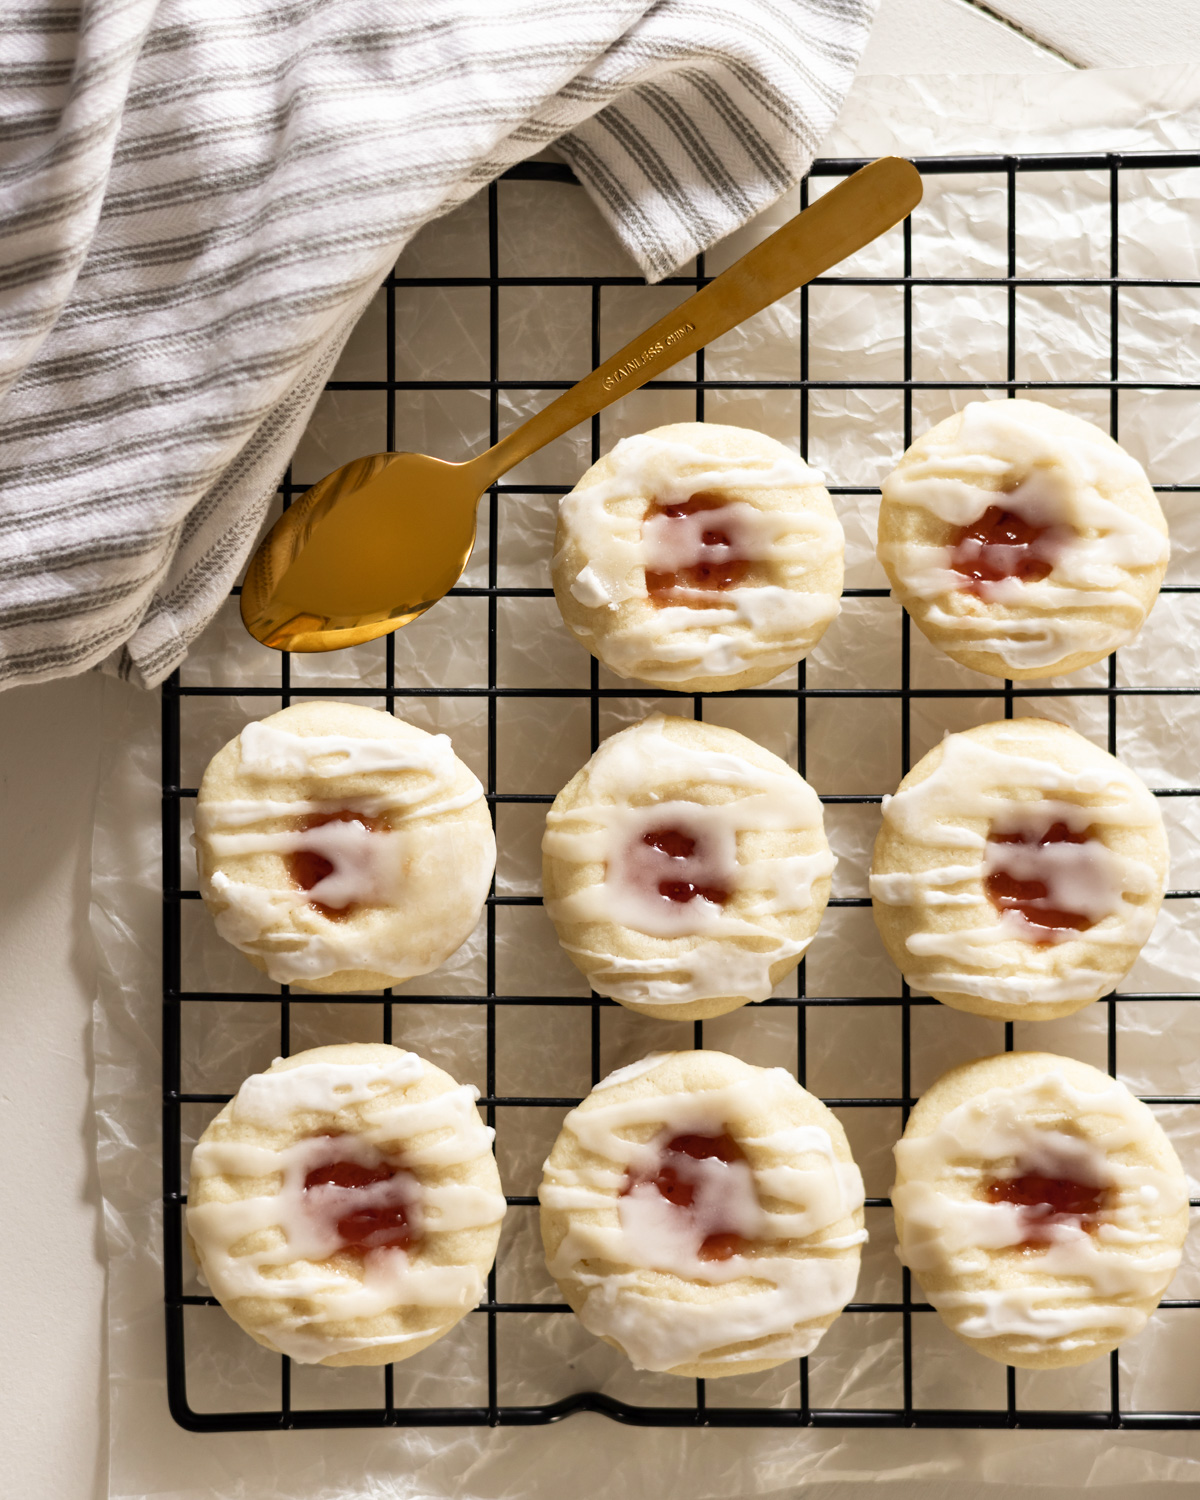 Thumbprint cookies drizzled with almond glaze.